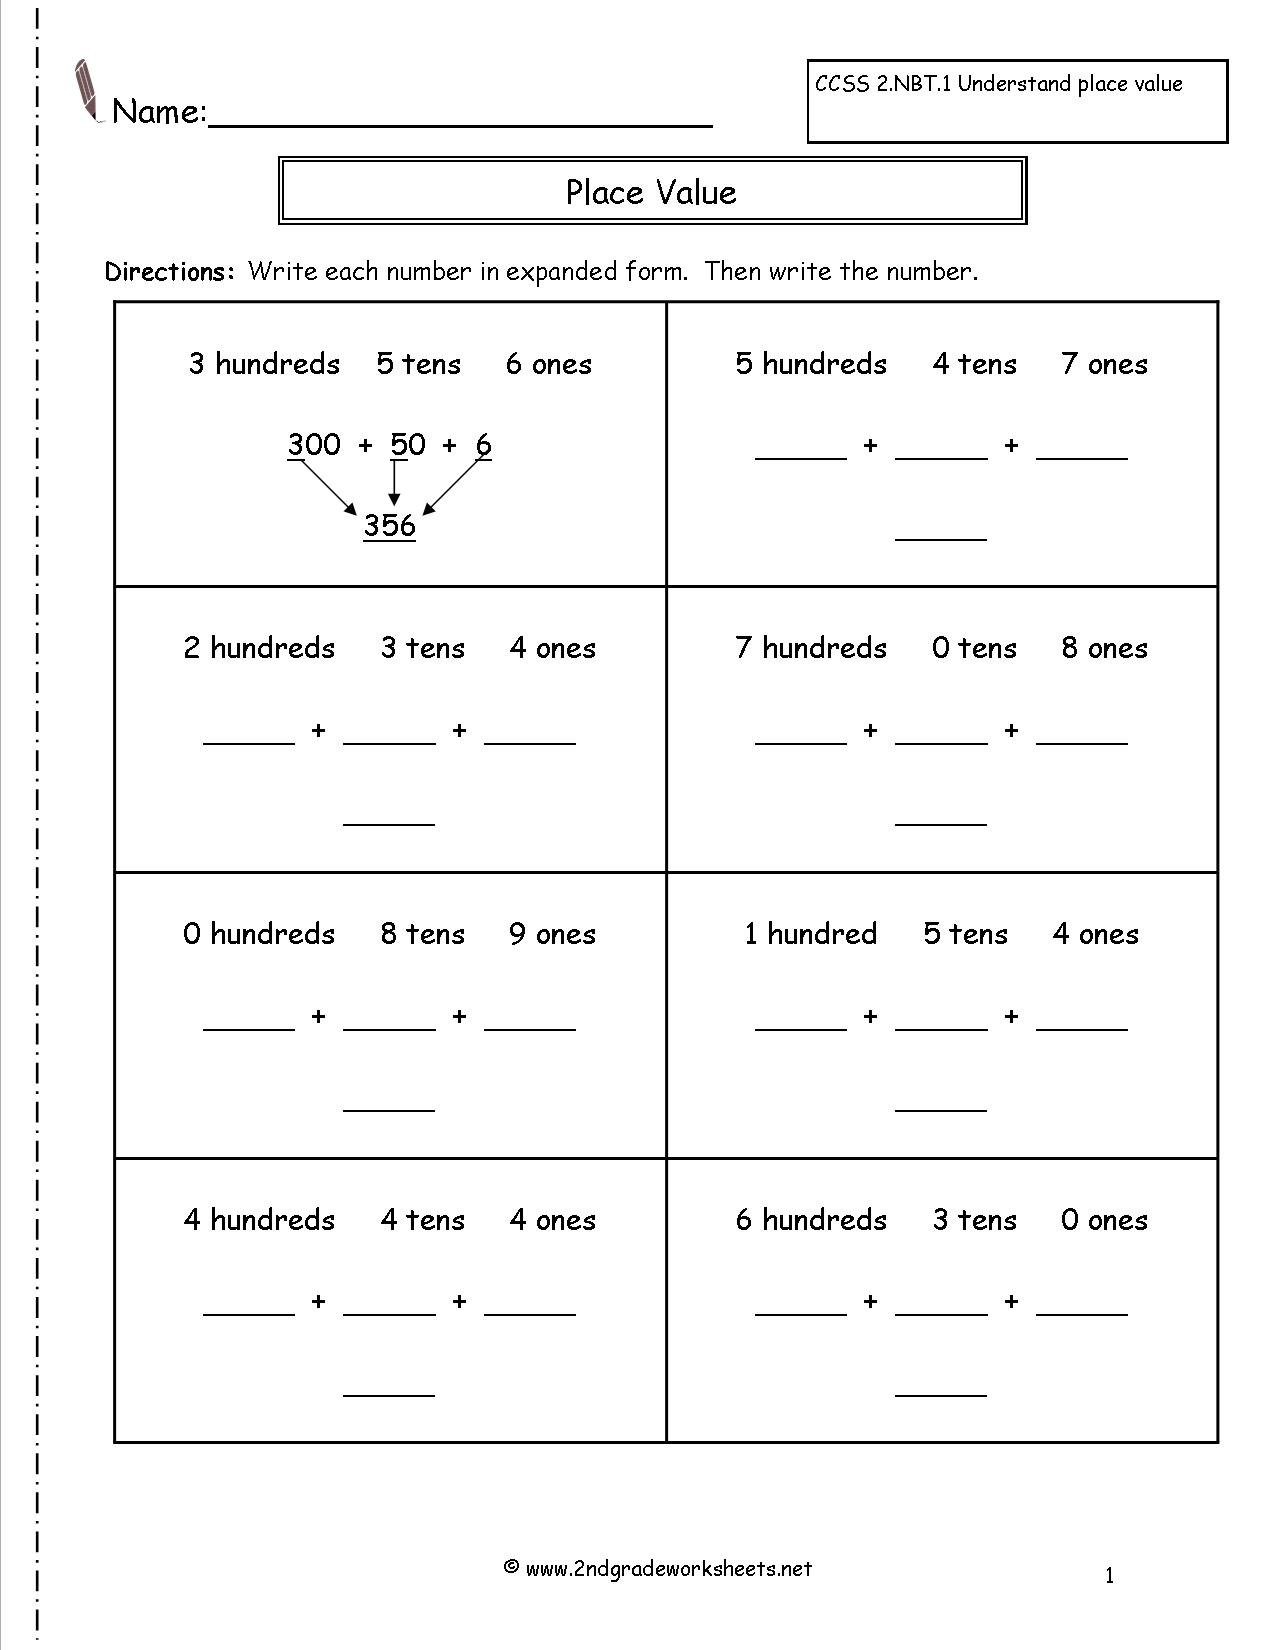 Second Grade Reading And Writing Numbers To 1000 Worksheets Throughout 2Nd Grade Writing Worksheets